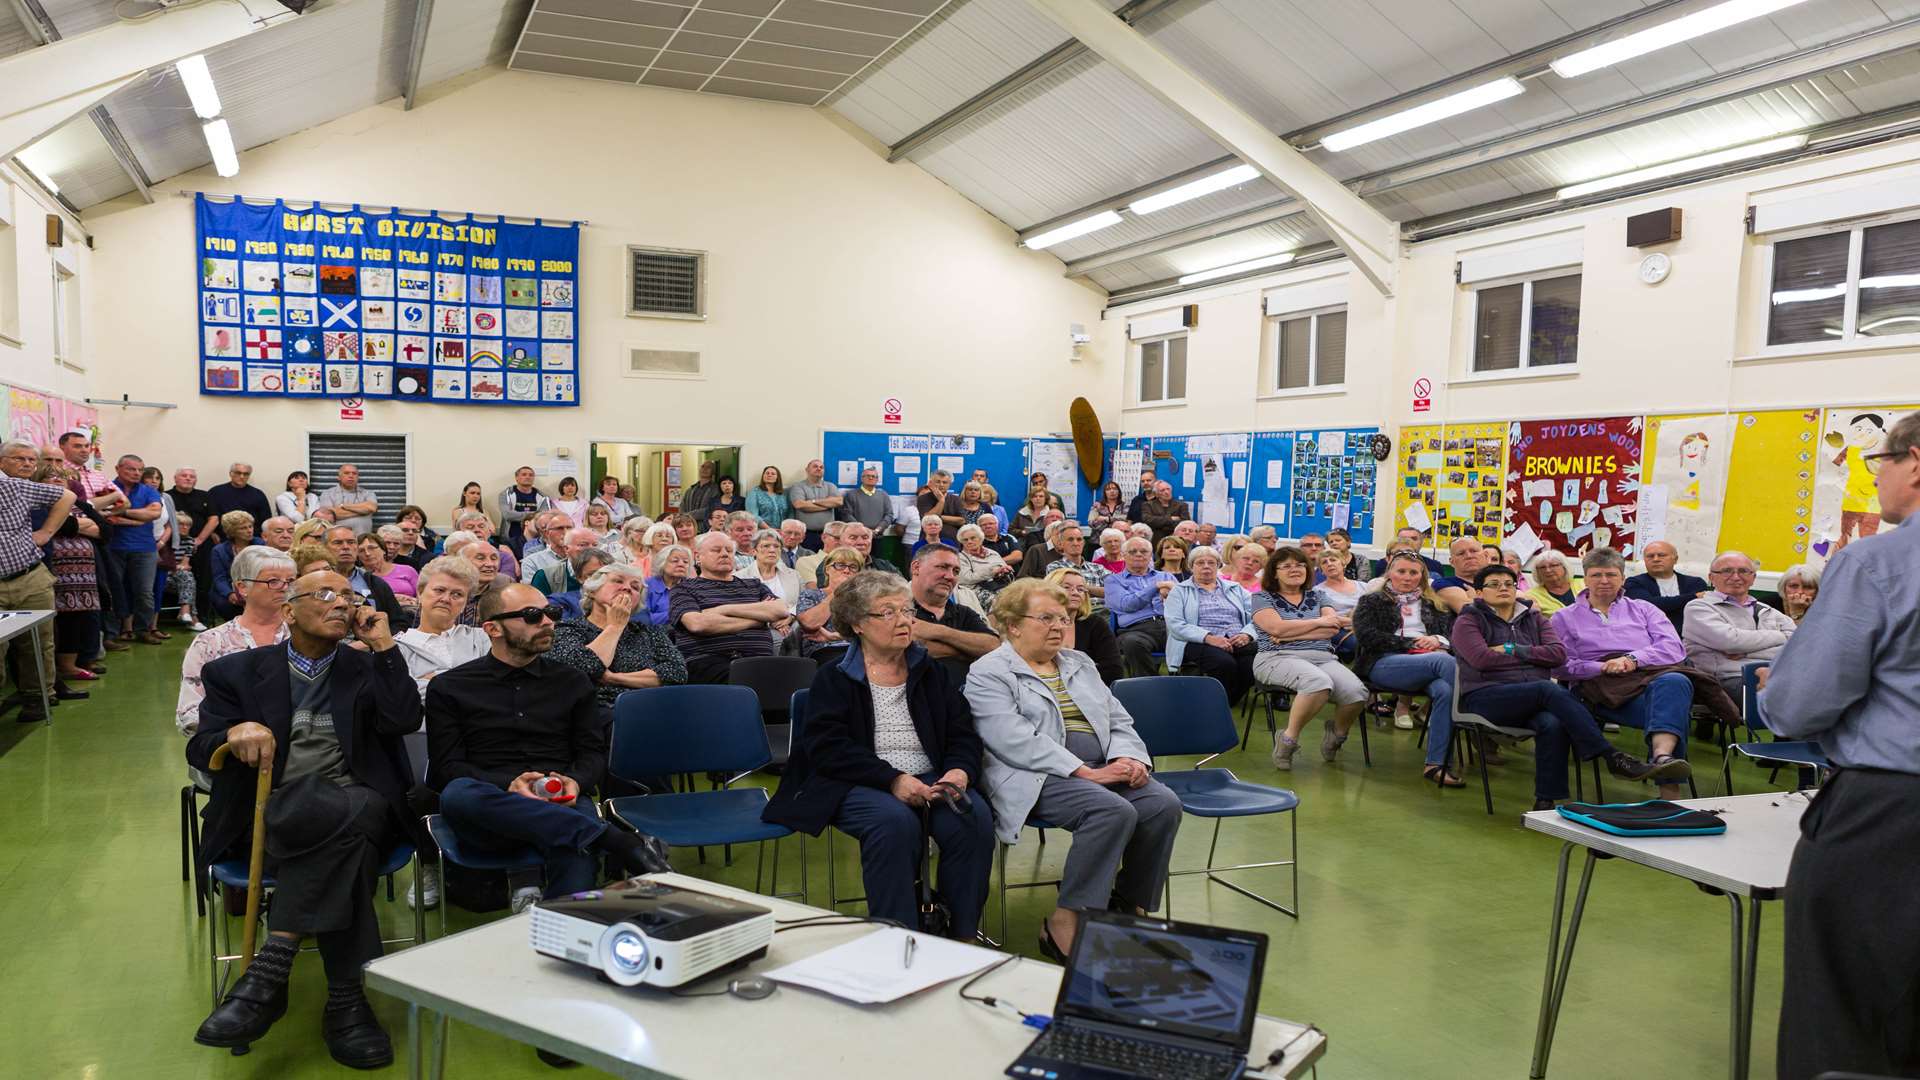 People arrived in droves at the Scout and Guides hut in Eden Road, Joydens Wood, for a meeting during the public consultation of the plan for a 70-bedroom care home